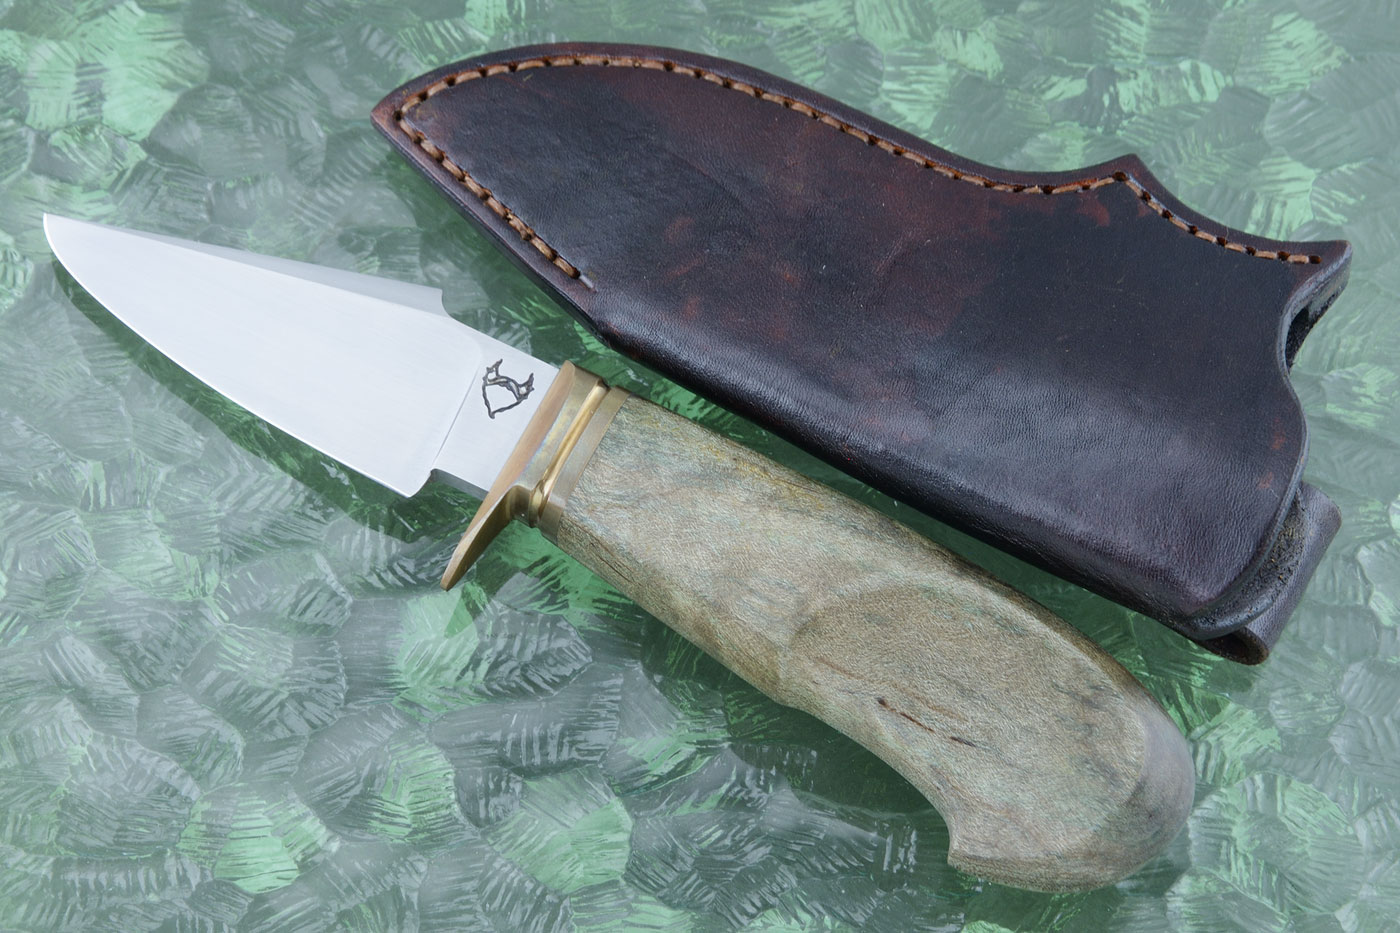 Harpoon Tip EDC with Green Maple